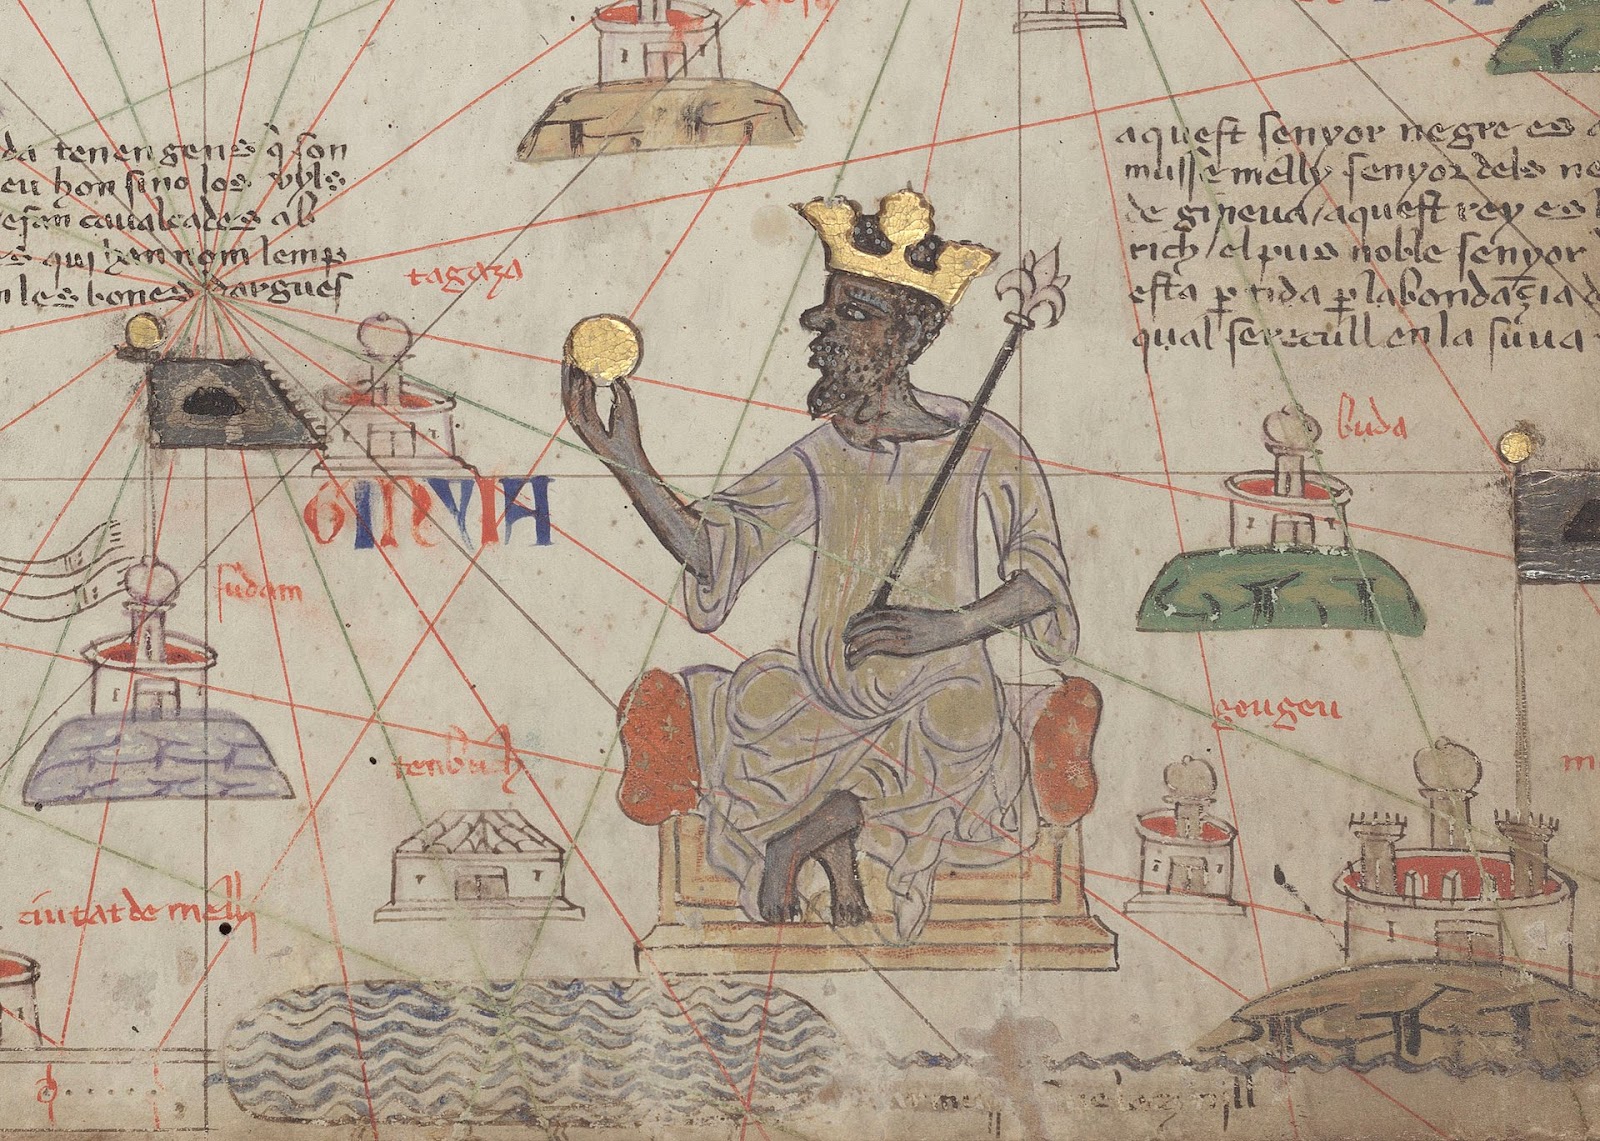 Mansa Musa as a large figure sitting on a throne overlooking buildings with a gold crown, gold scepter, and holding a gold coin.